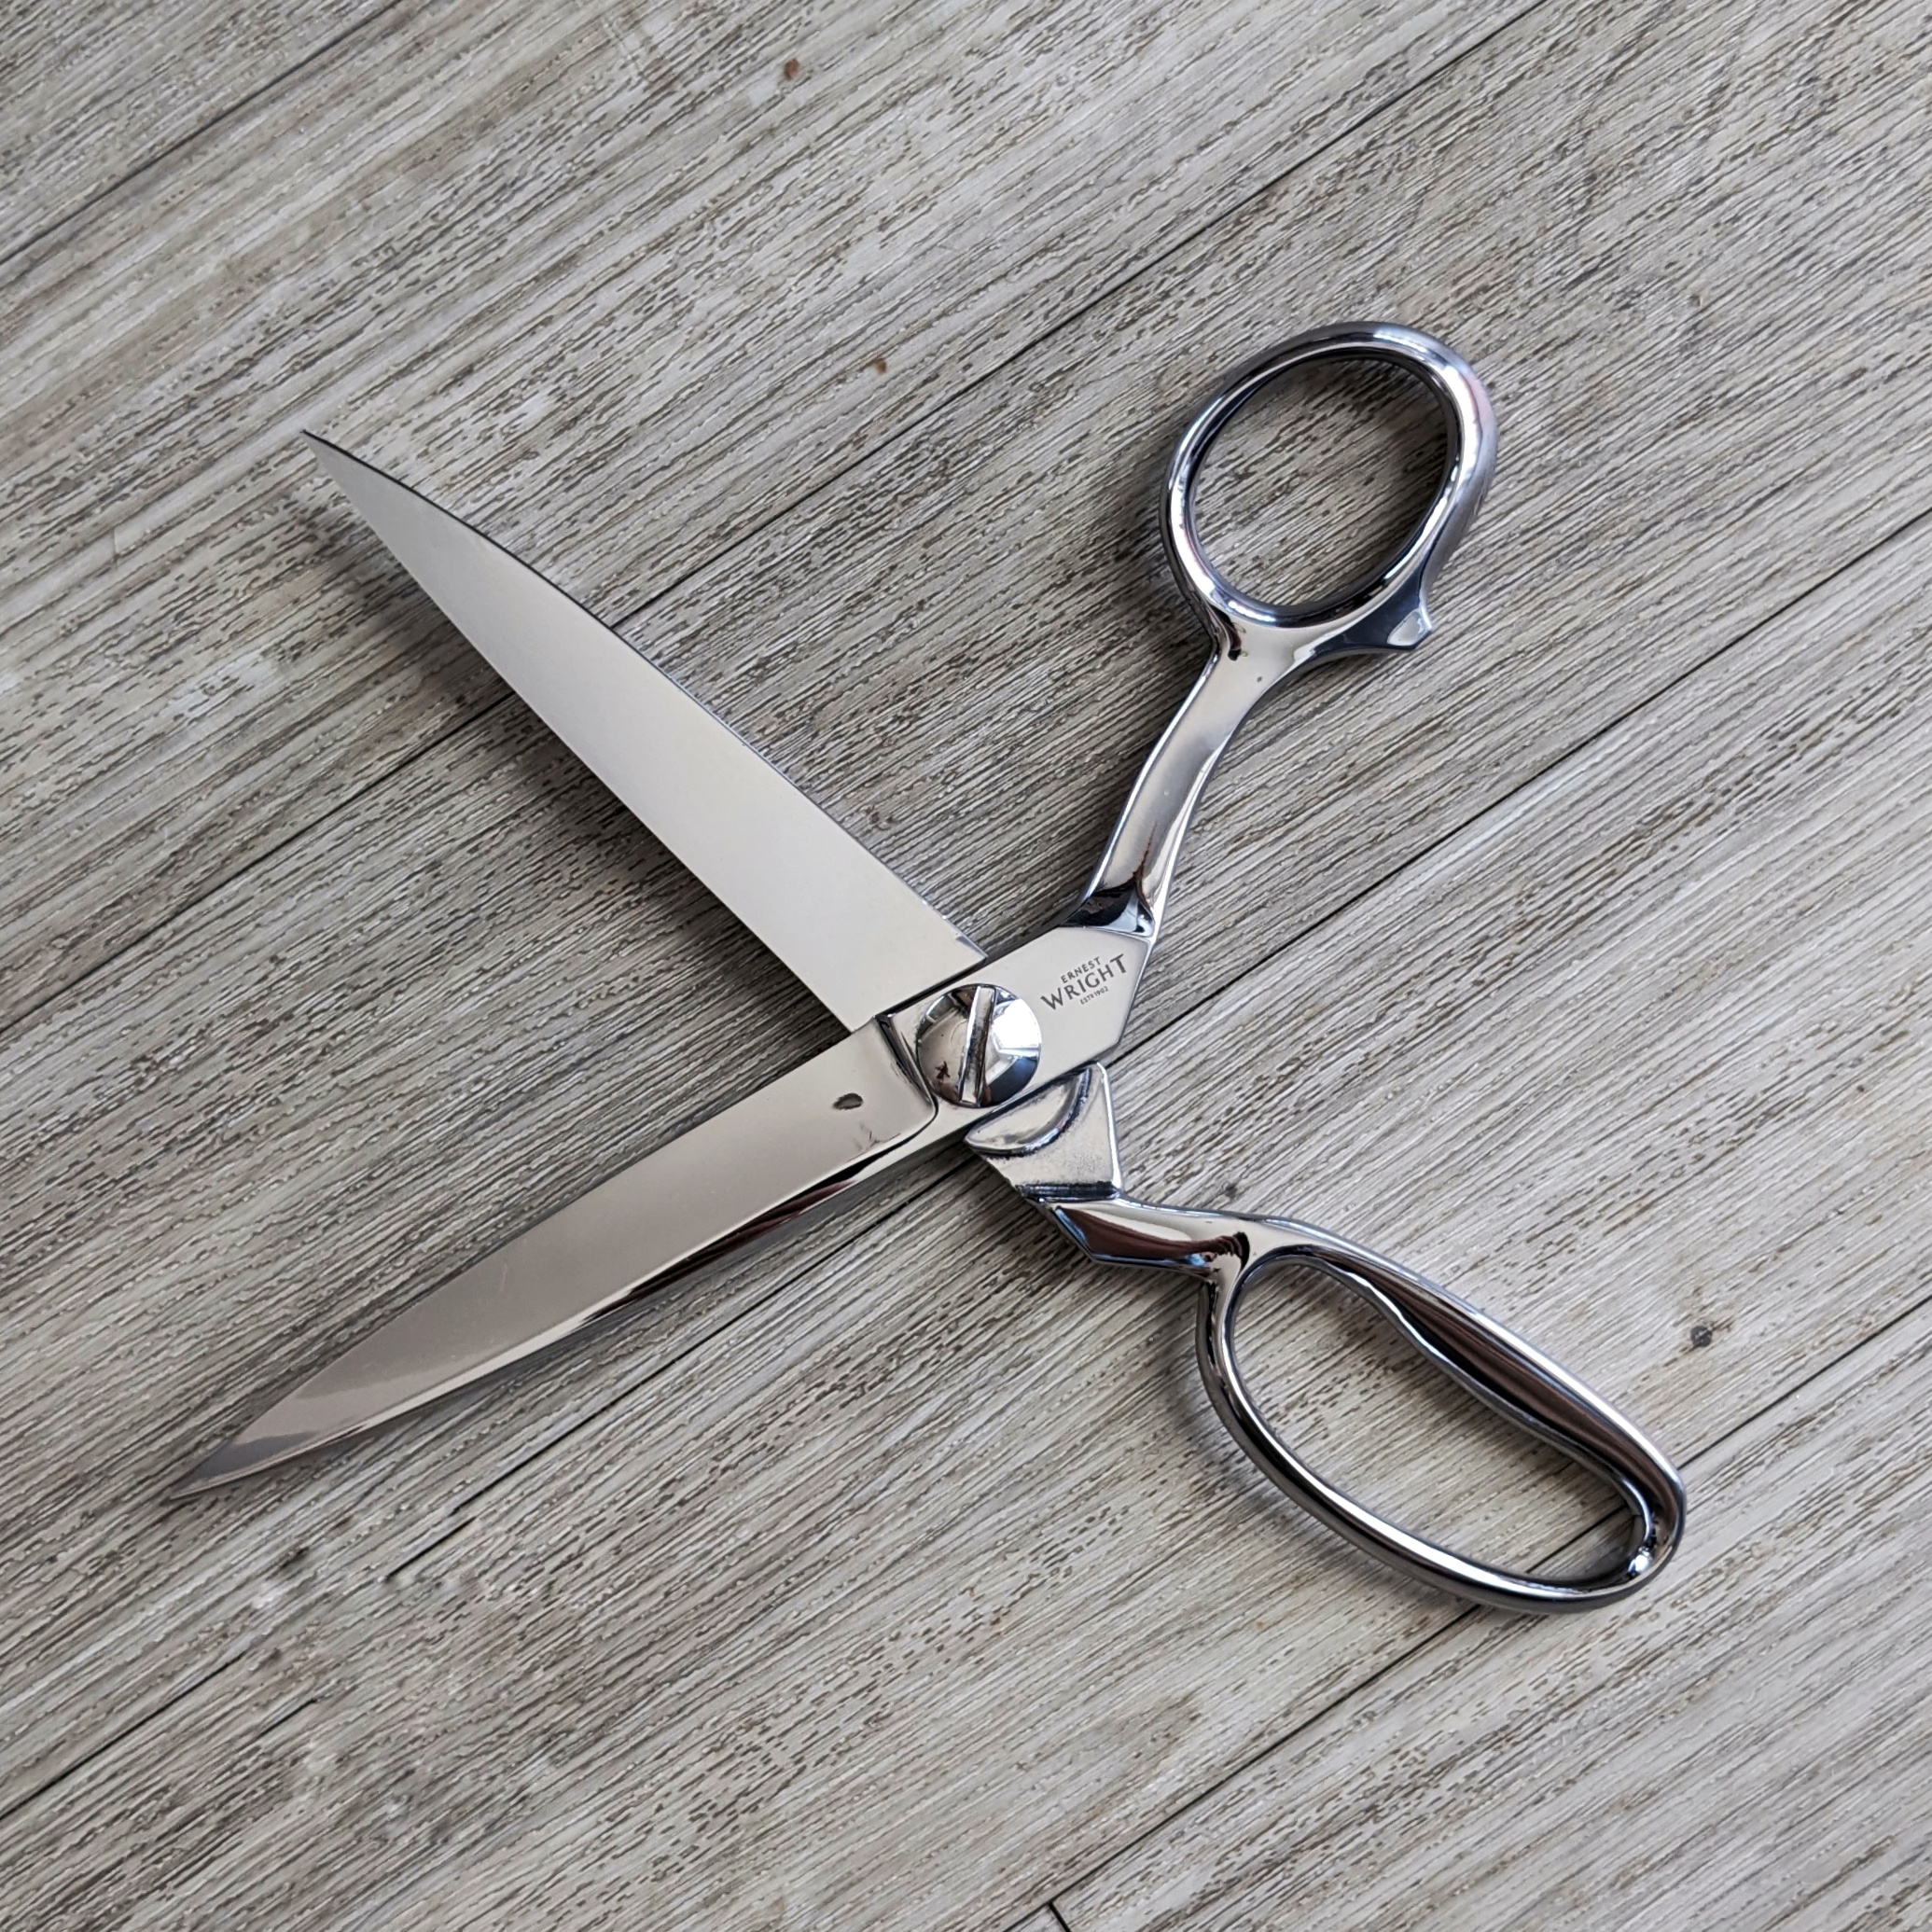 Leather shears, Leather scissors